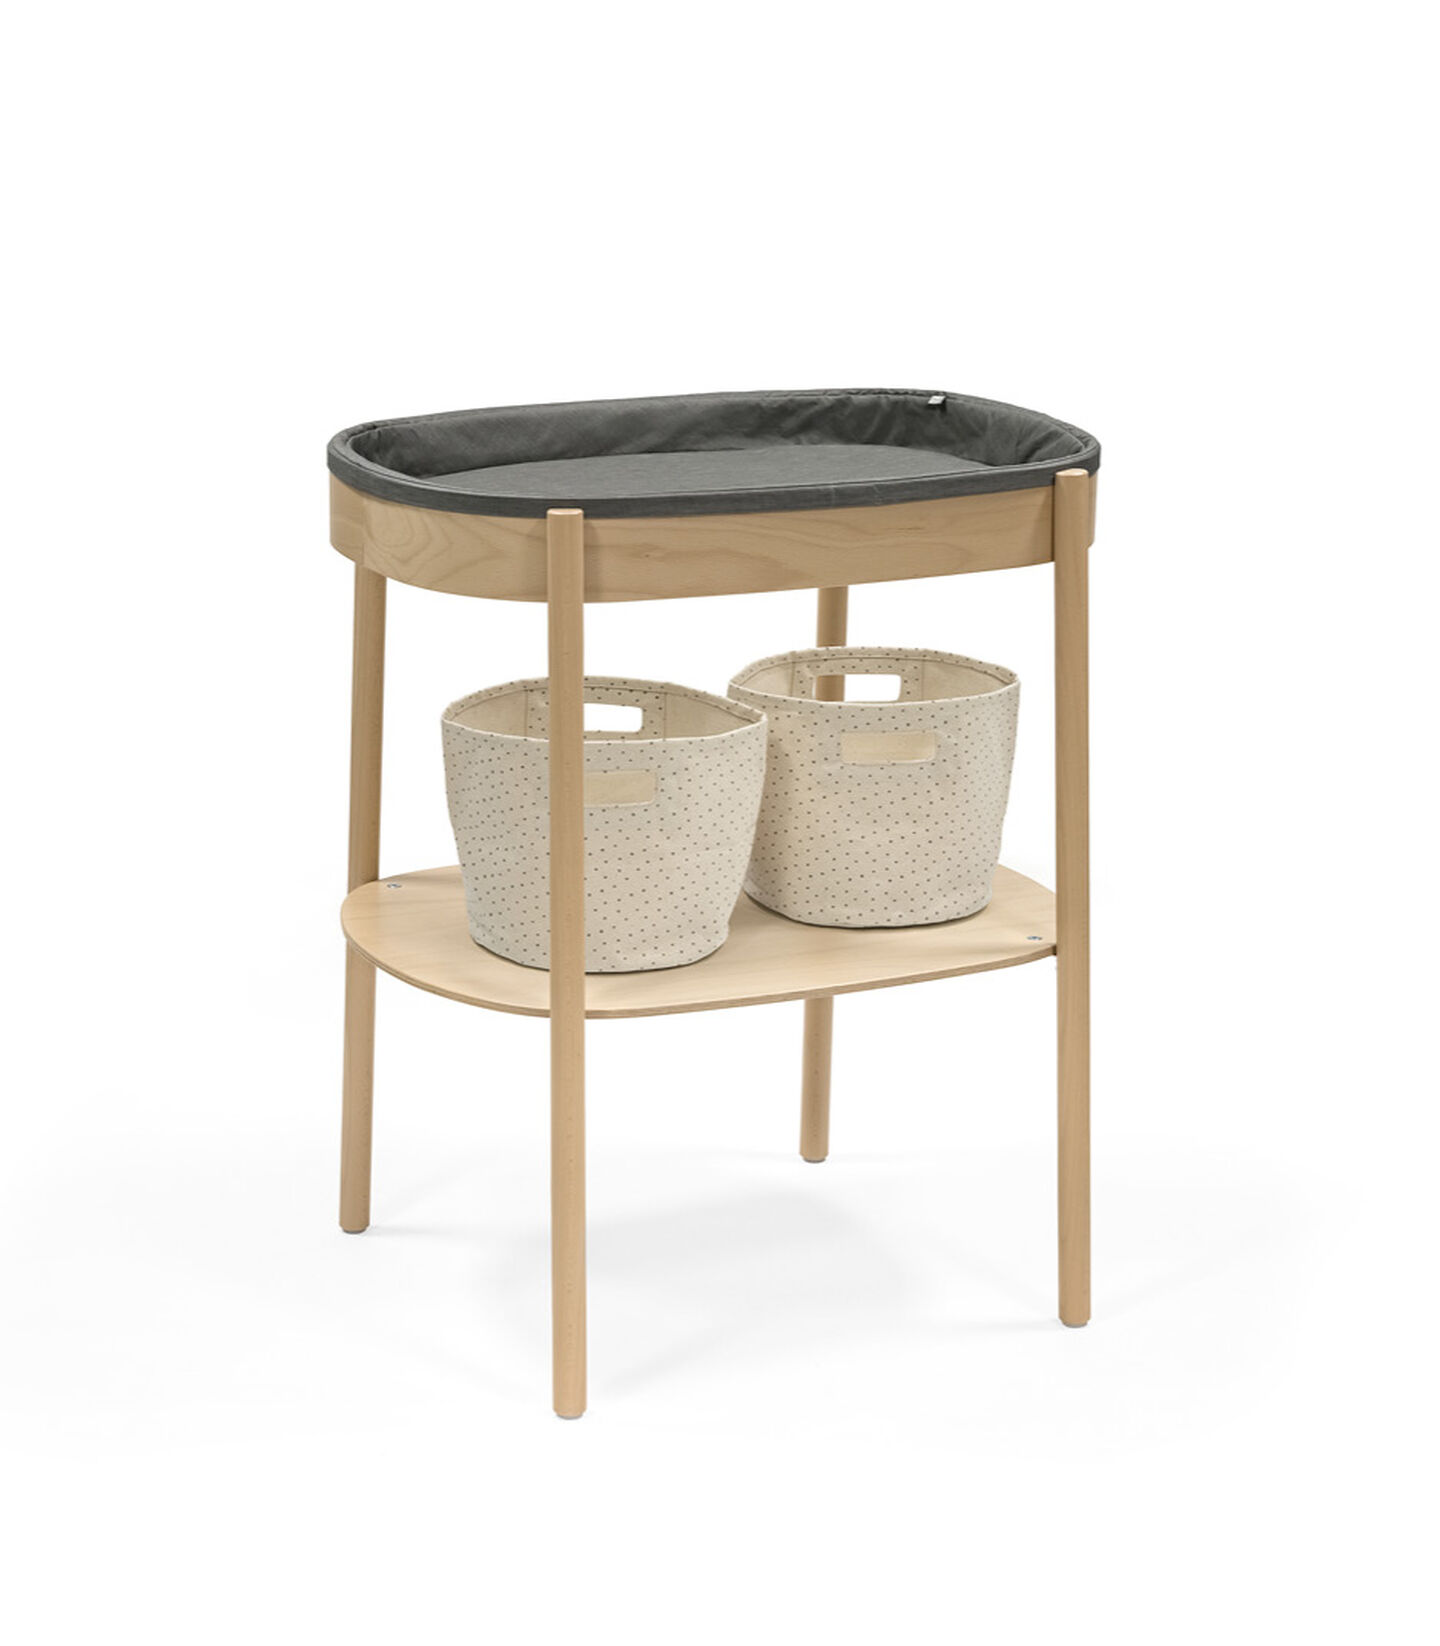 Stokke® Sleepi™ Changing Table, Natural, with Storage Baskets. Changing Pad Grey. view 3